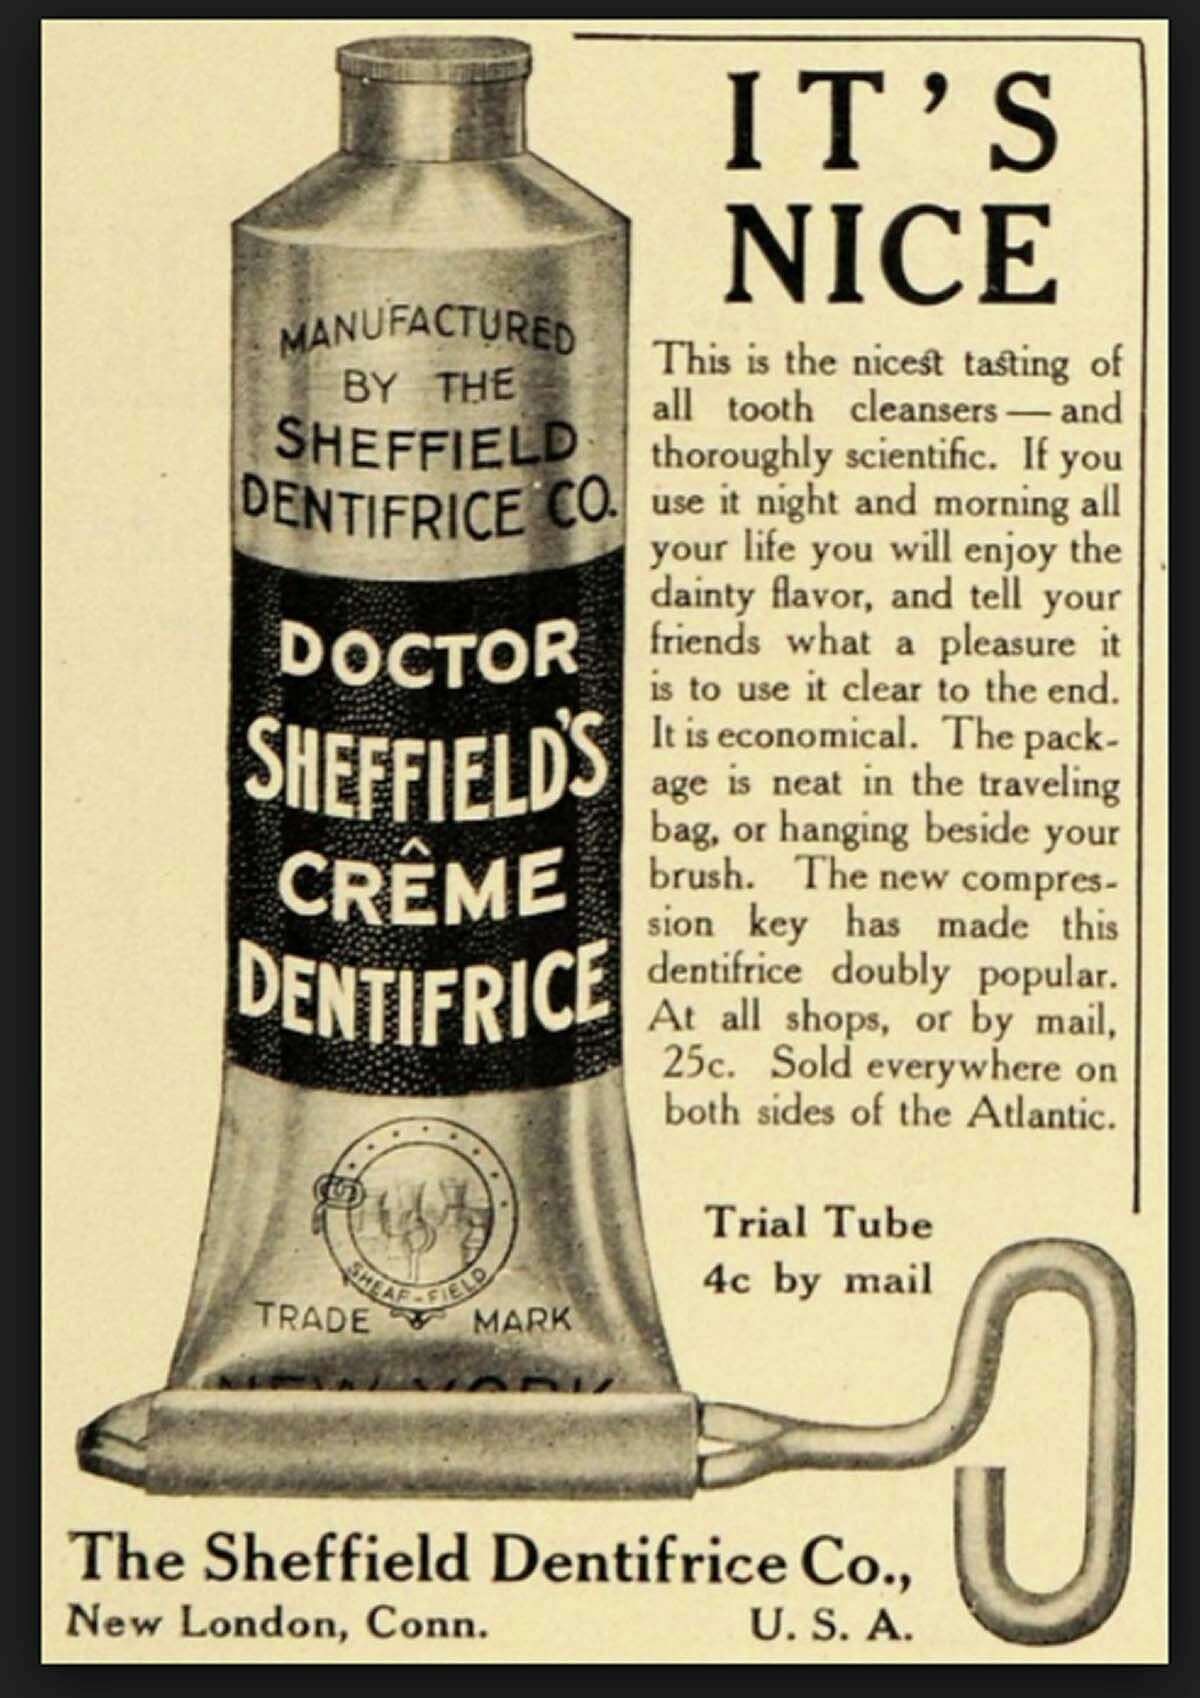 An early-20th-century advertisement for Dr. Sheffield's Crème Dentifrice